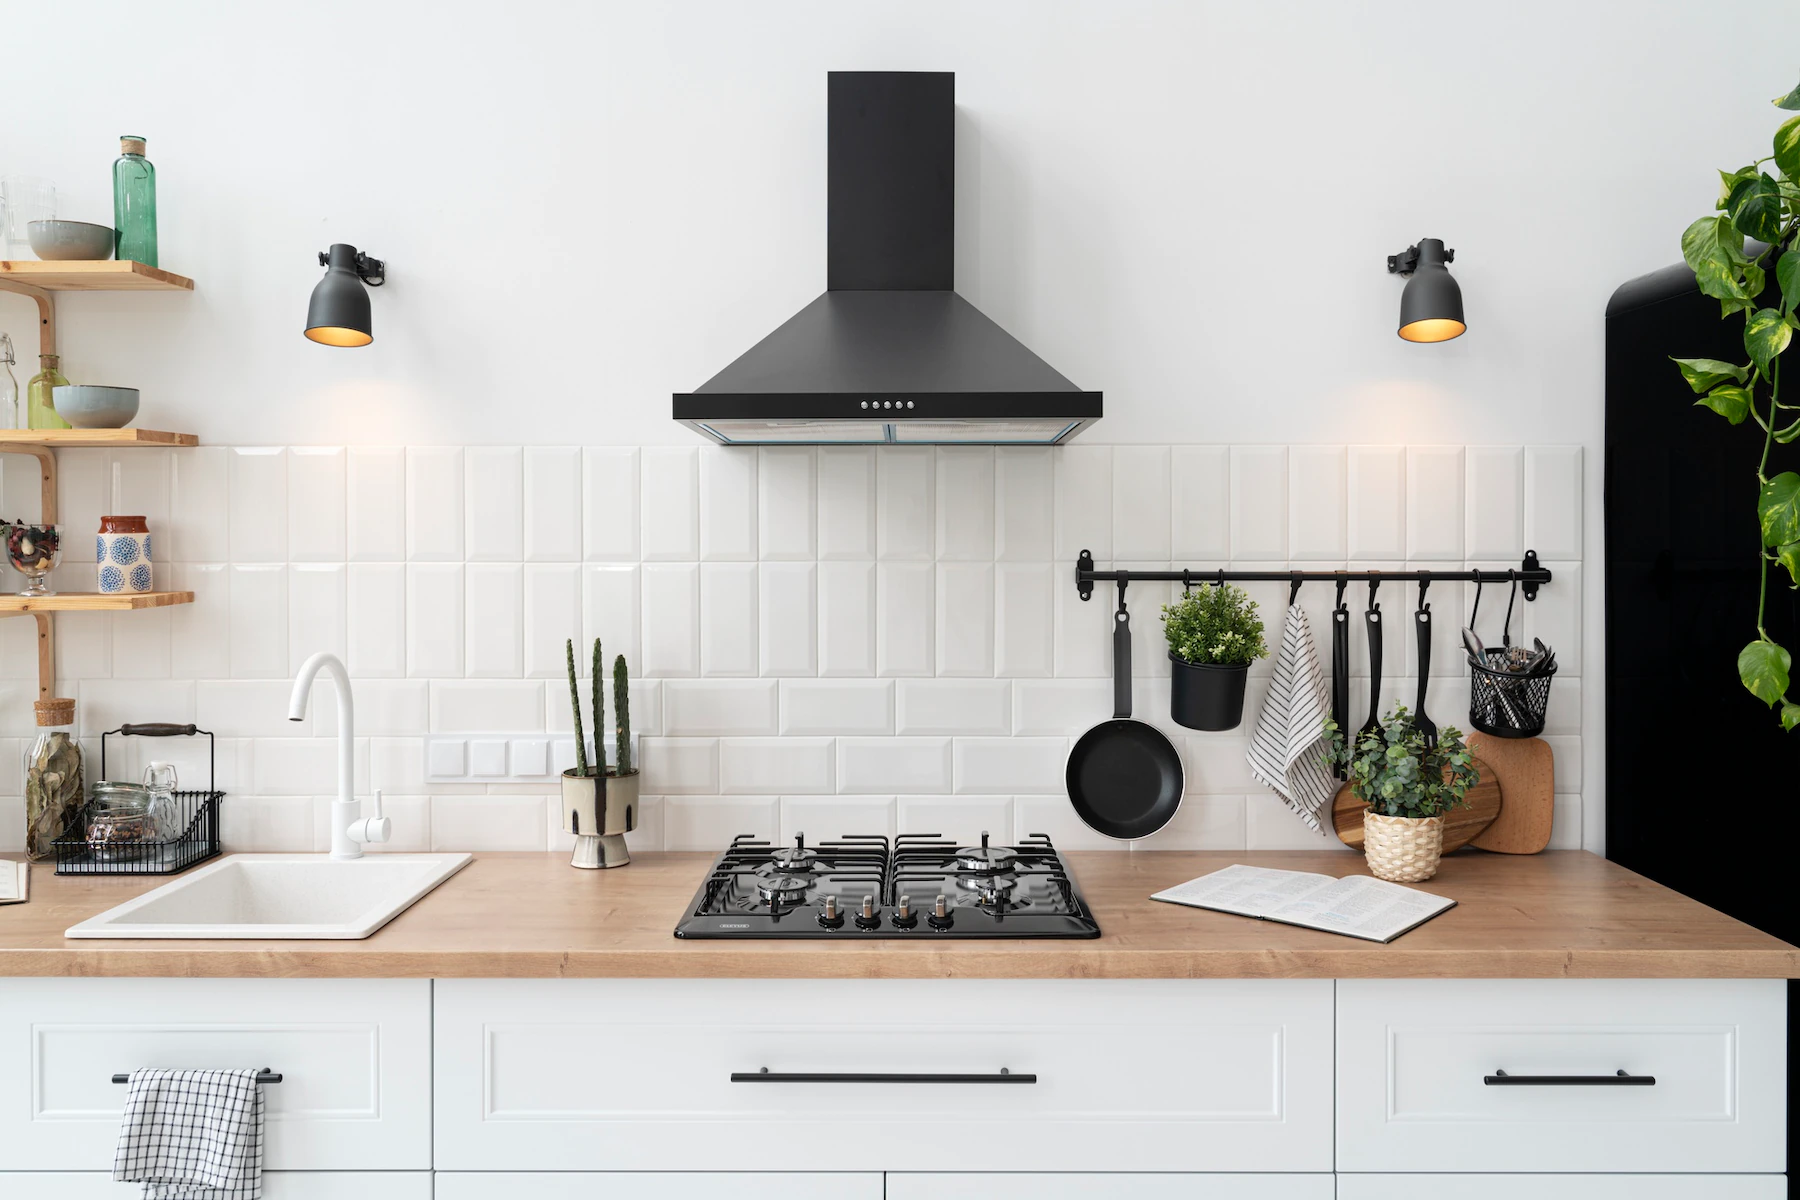 A stylish kitchen featuring a white subway tile backsplash with a slightly staggered pattern, providing a clean and modern look. The kitchen includes a black range hood above a gas stove, with a wooden countertop that adds warmth to the space. A white farmhouse sink is positioned to the left, and open wooden shelves hold various kitchen items. Black wall-mounted sconces provide additional lighting, and a black rail with hooks for hanging utensils and plants adds a practical yet decorative touch. This kitchen showcases a beautifully designed backsplash that complements the overall modern aesthetic.